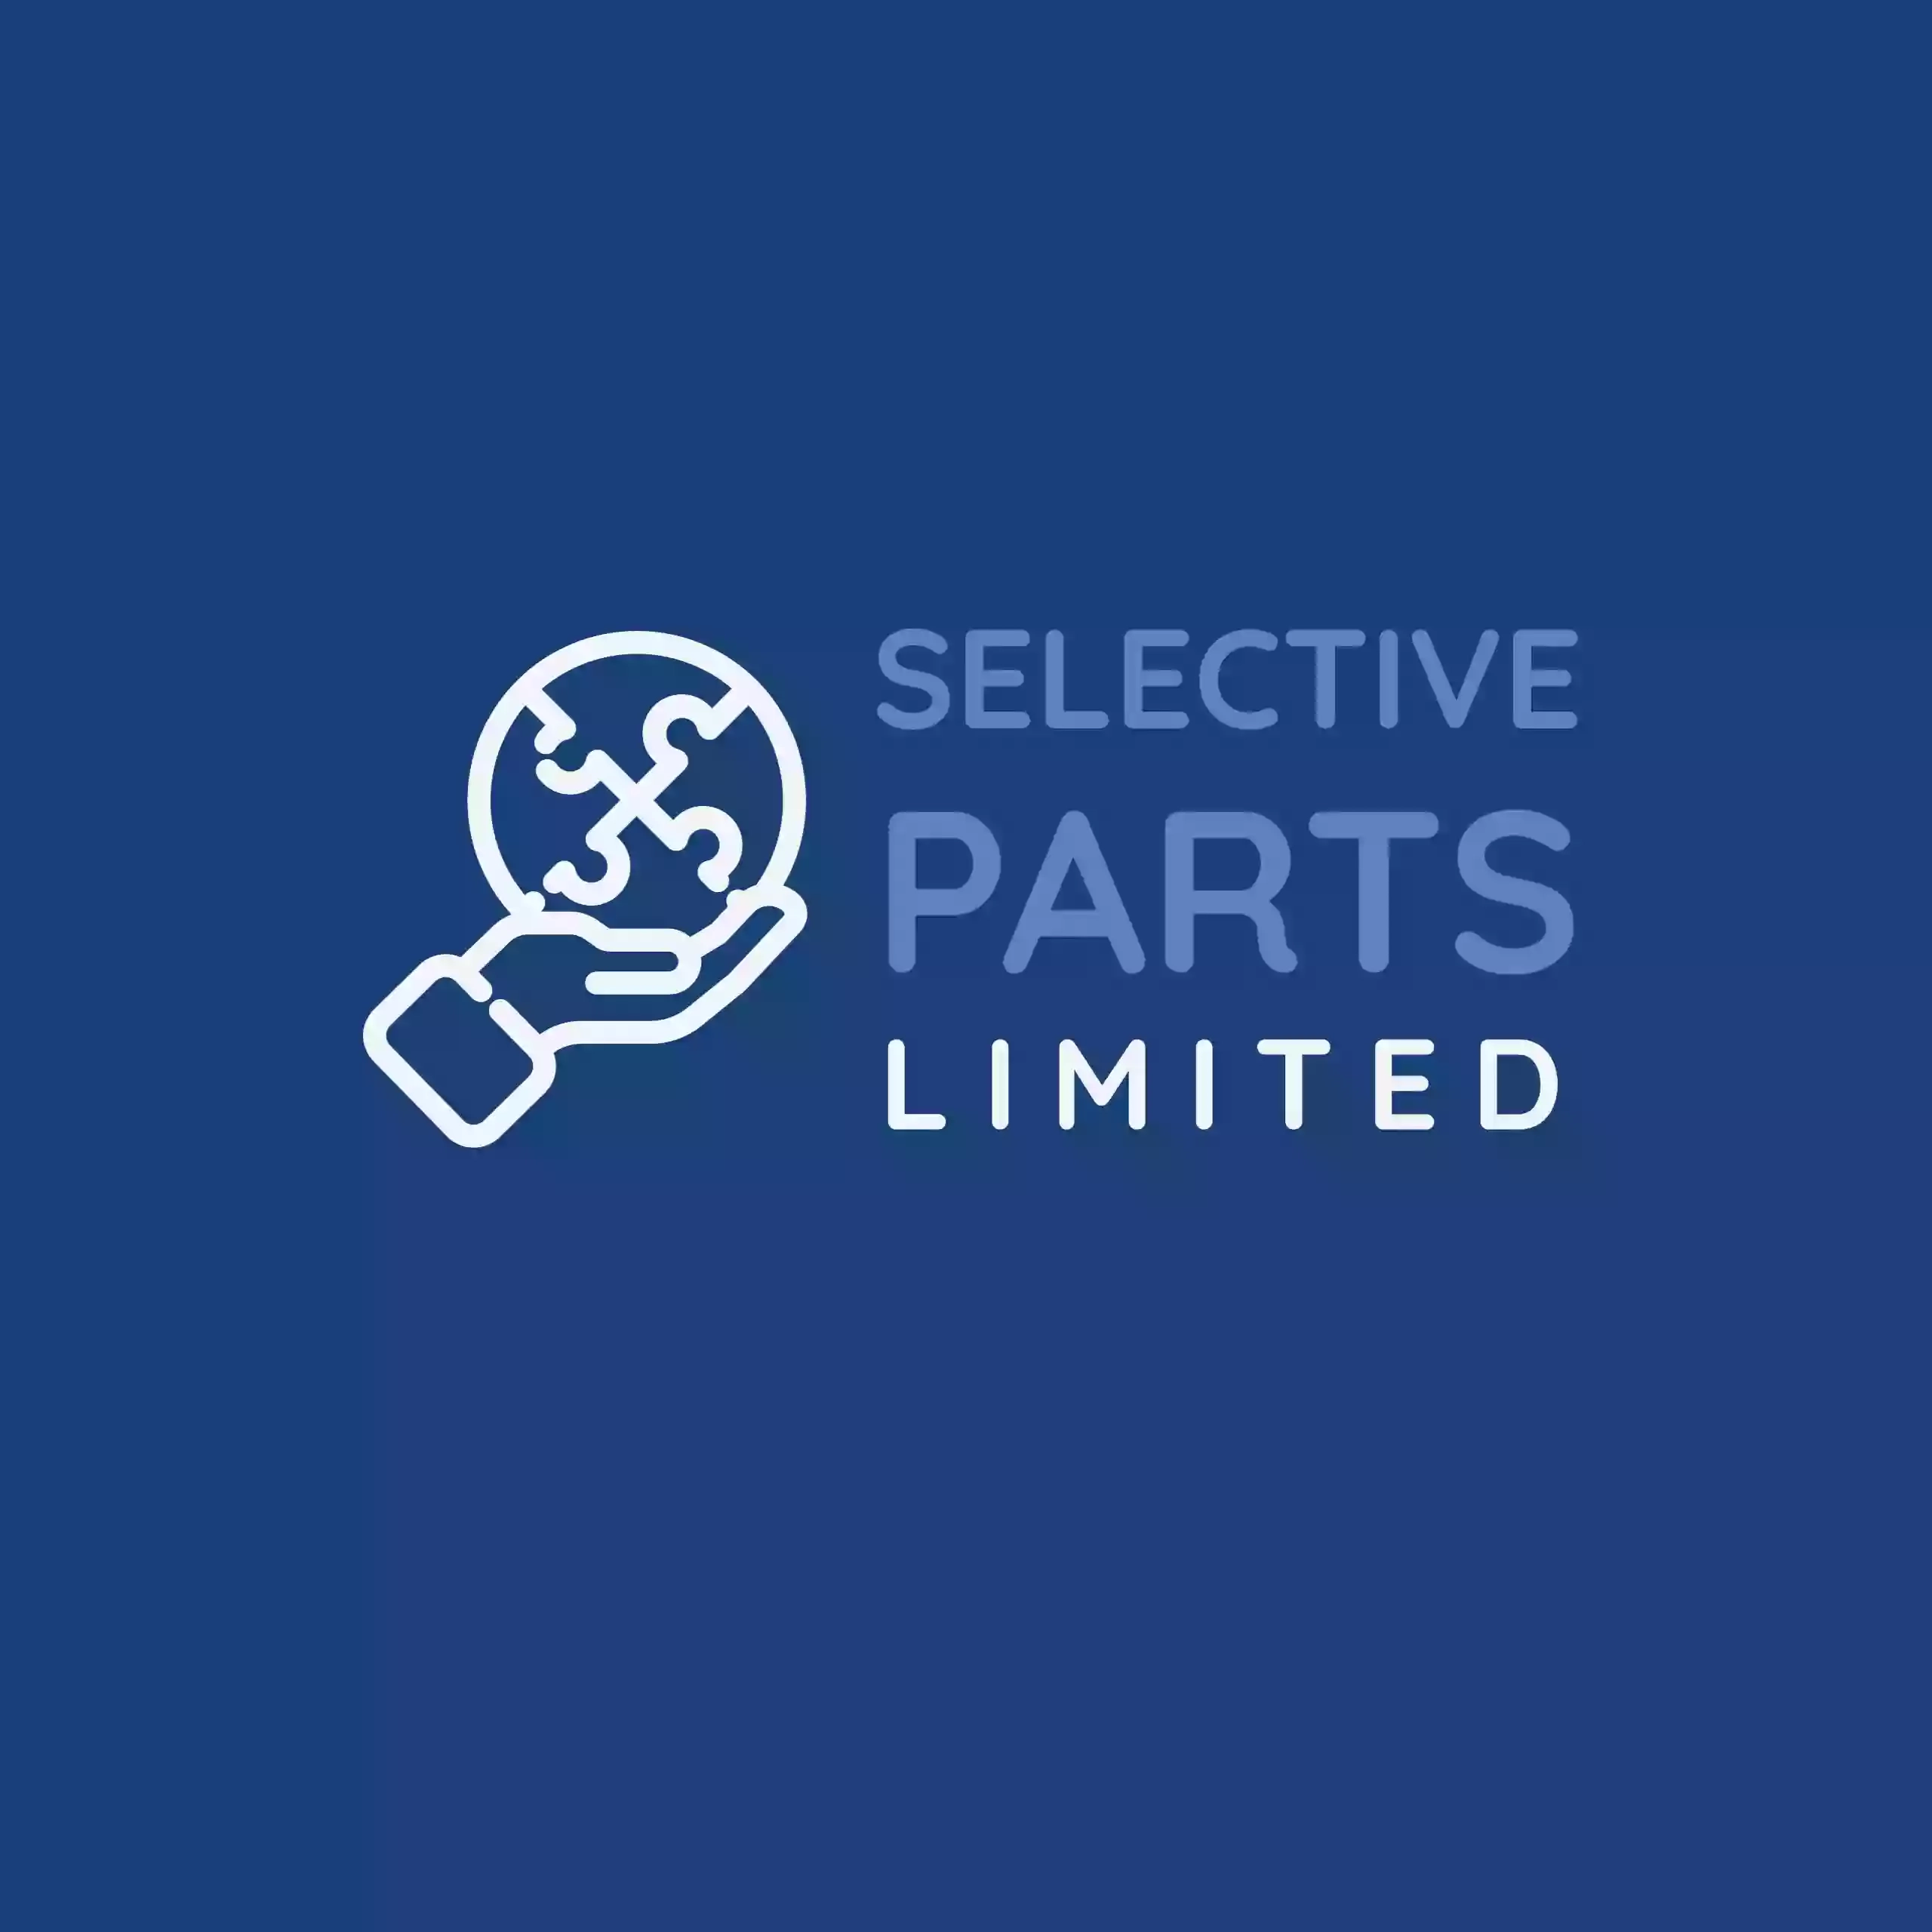 Selective Parts Limited